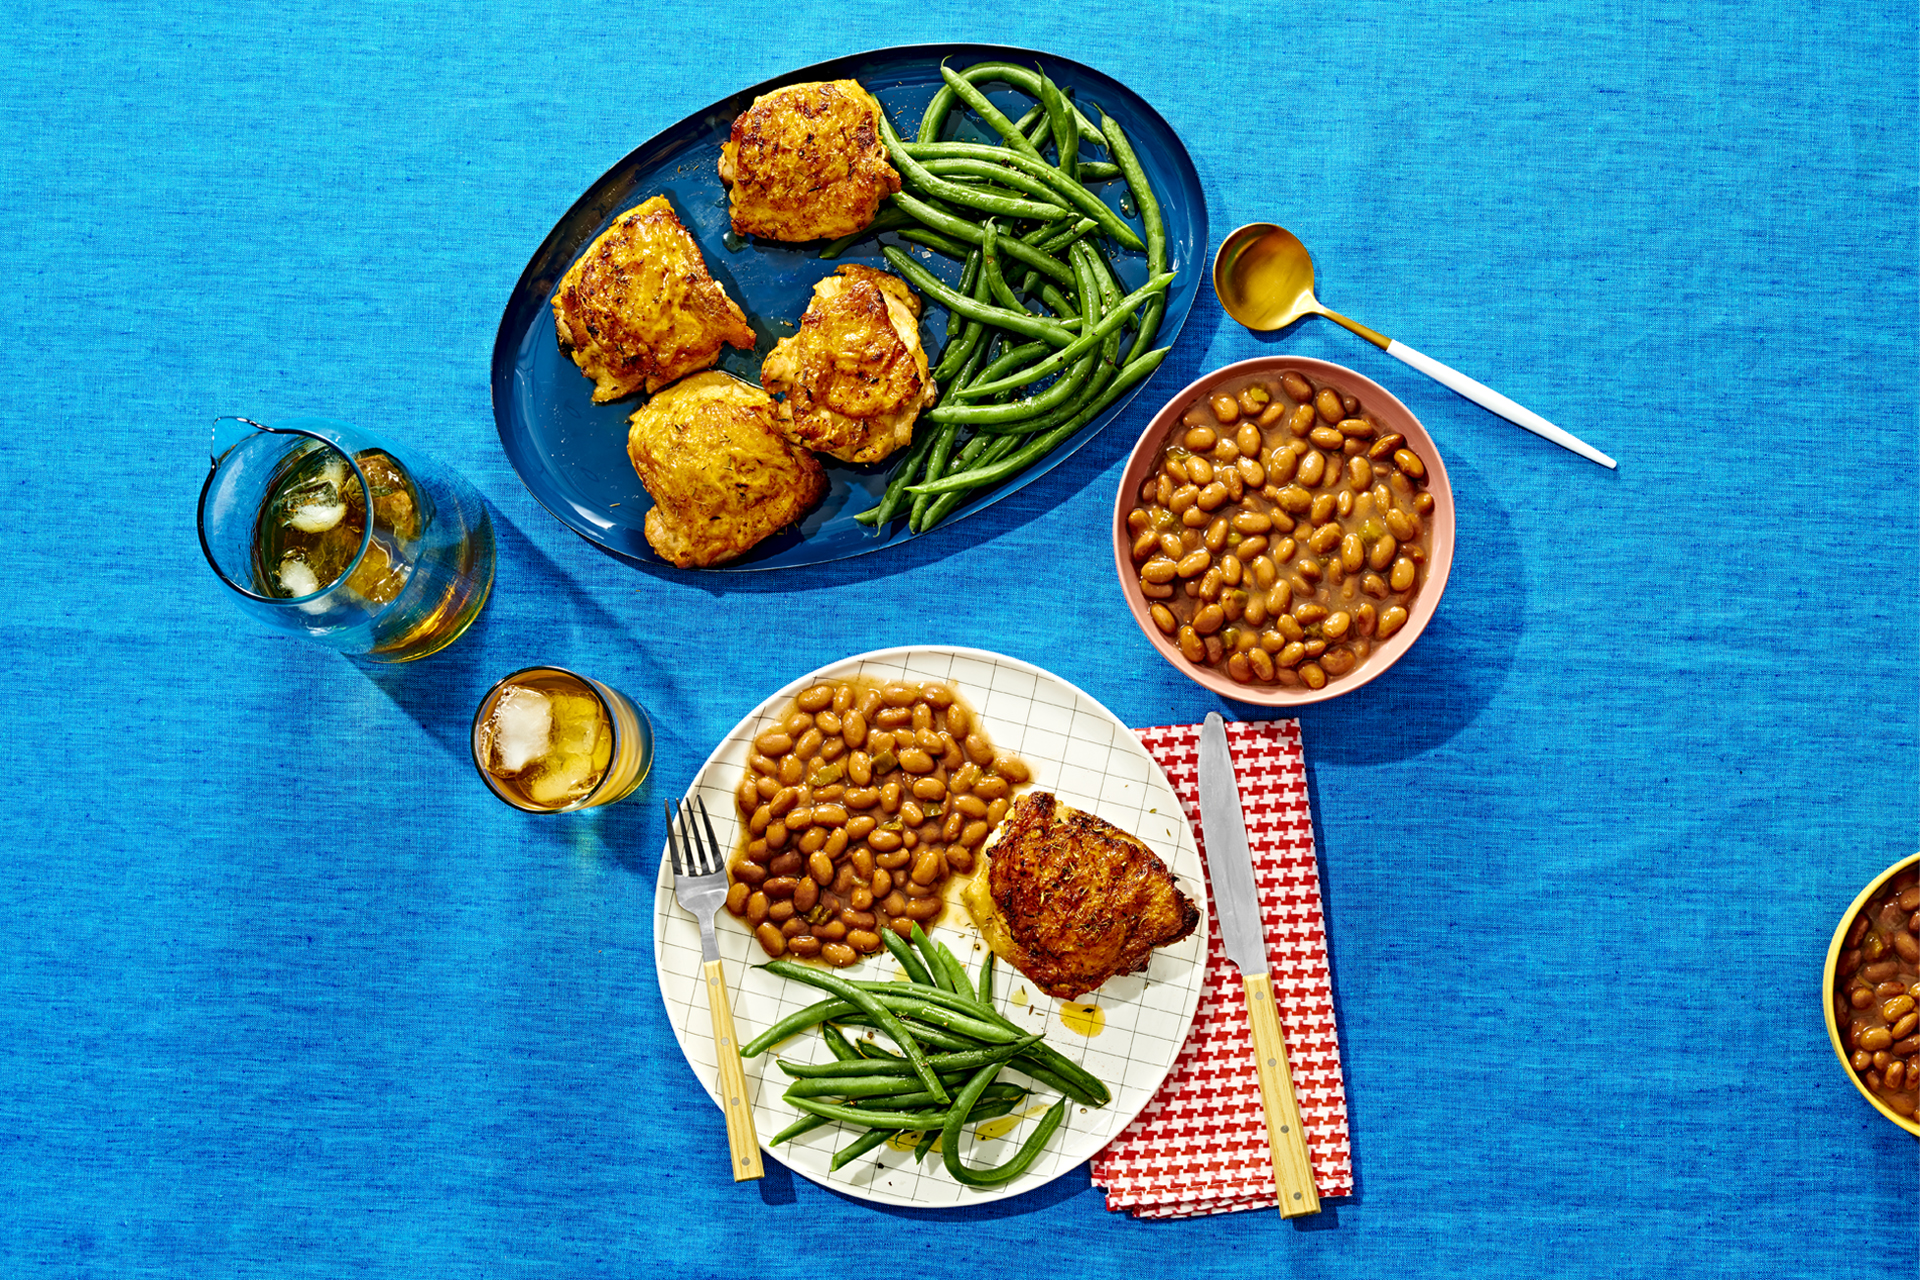 A dinner setup with a loaded plate dinner plate, a serving plate with chicken and green beans, and bowl of pinto beans on a blue table cloth.